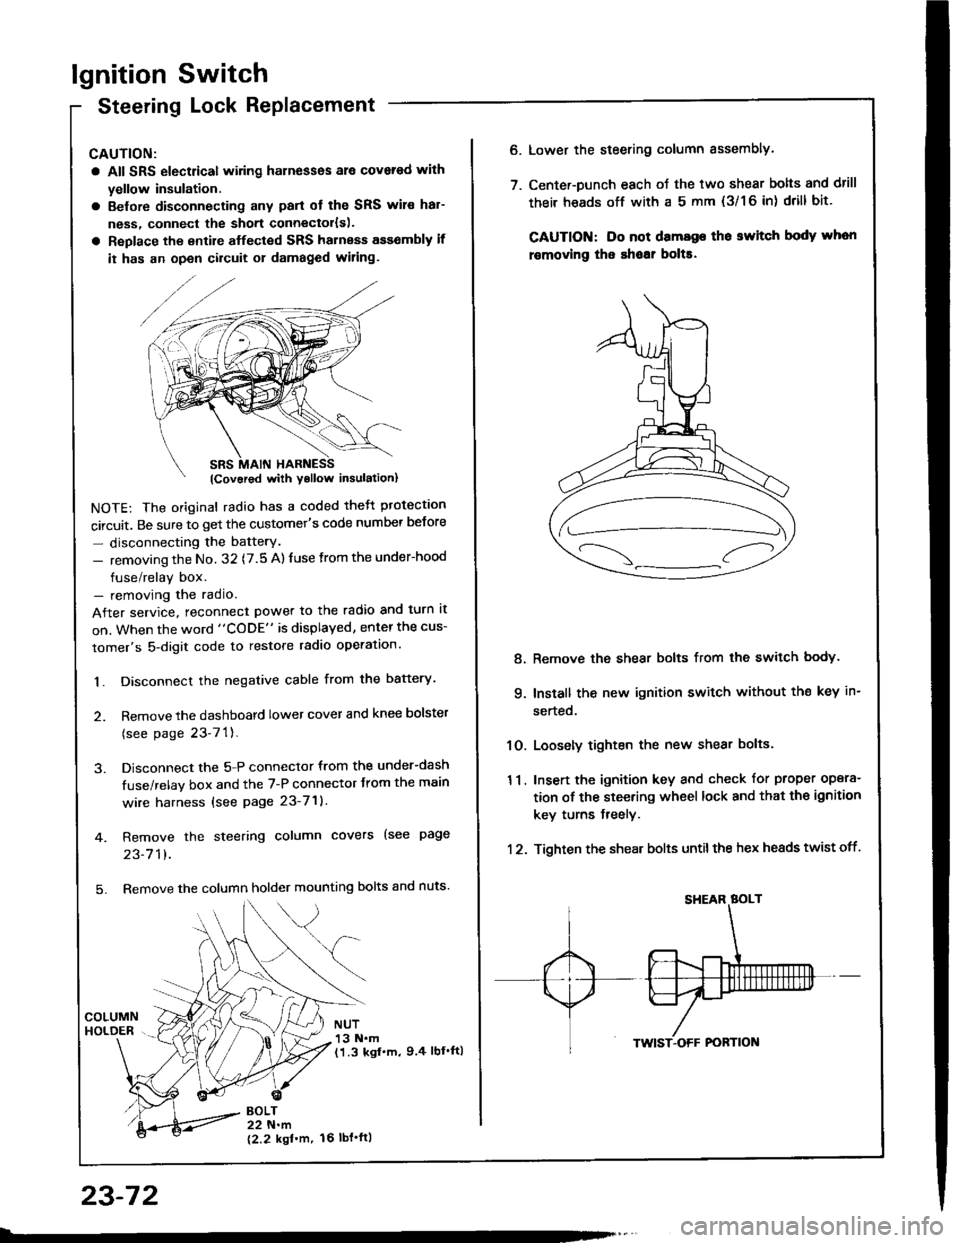 ACURA INTEGRA 1994  Service Repair Manual lgnition Switch
Steering Lock Replacement
CAUTION:
a All SRS electrical wiring harnesses ale covsred with
yellow insulation.
a Belore disconnecting any parl ot the SRS wir€ hal-
ness, connecl the sh